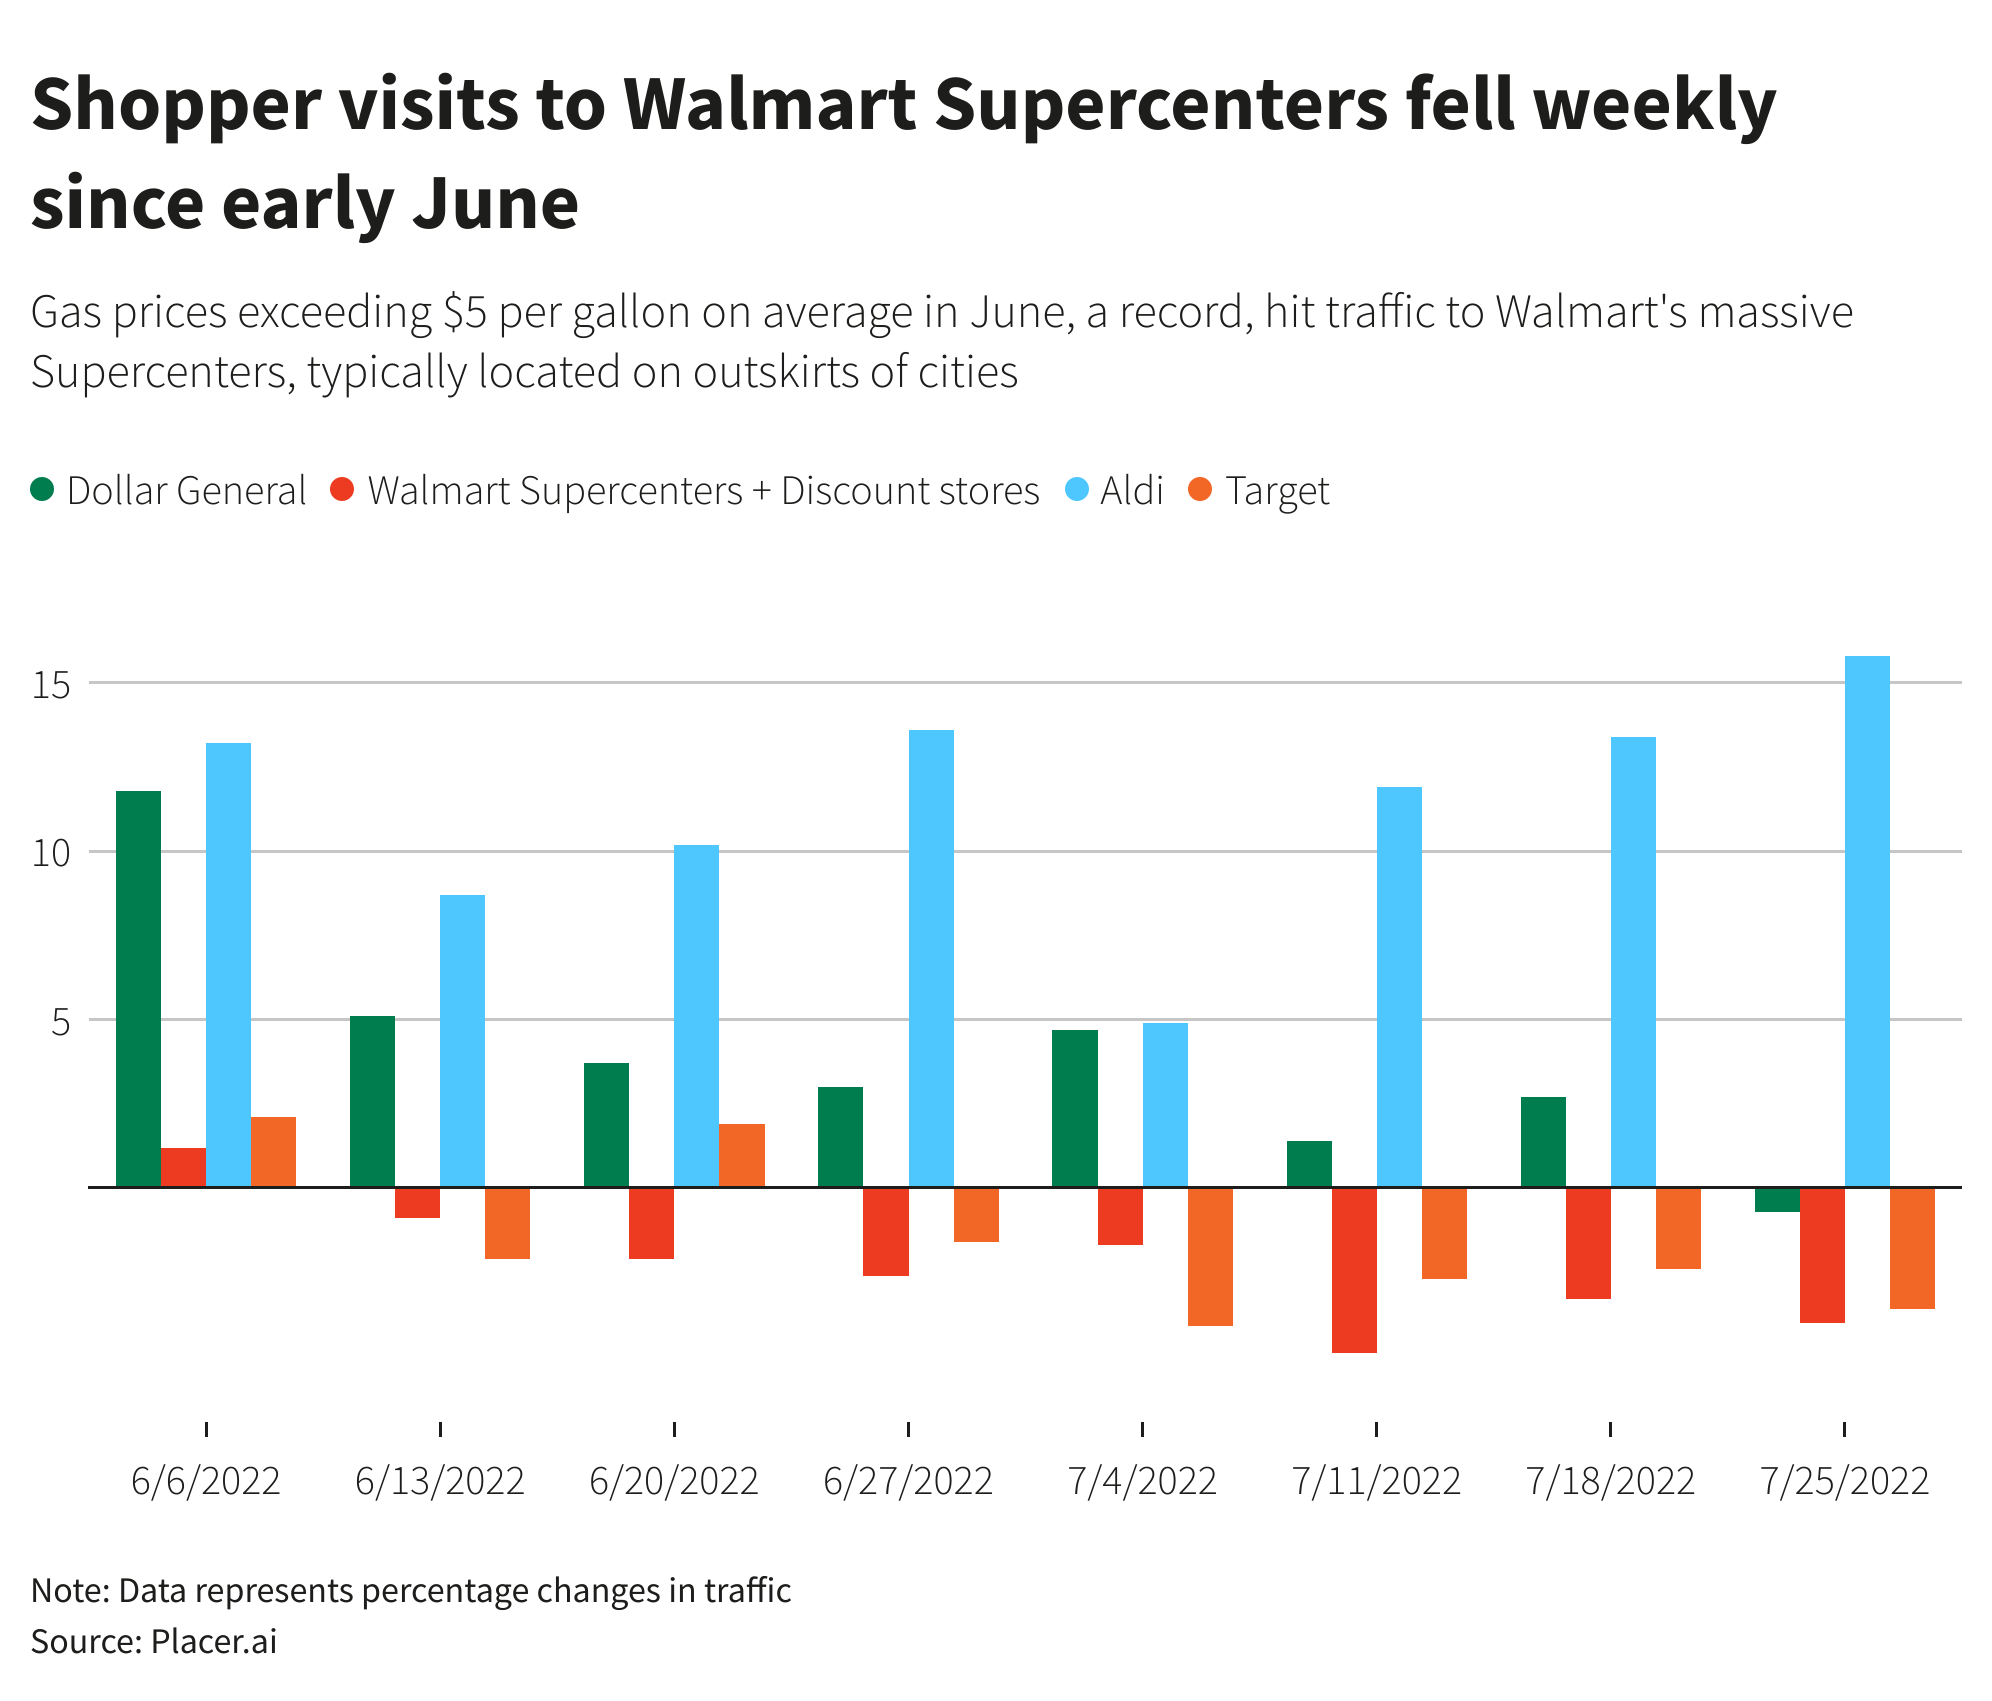 Shopper visits to Walmart Supercenters fell weekly since early June